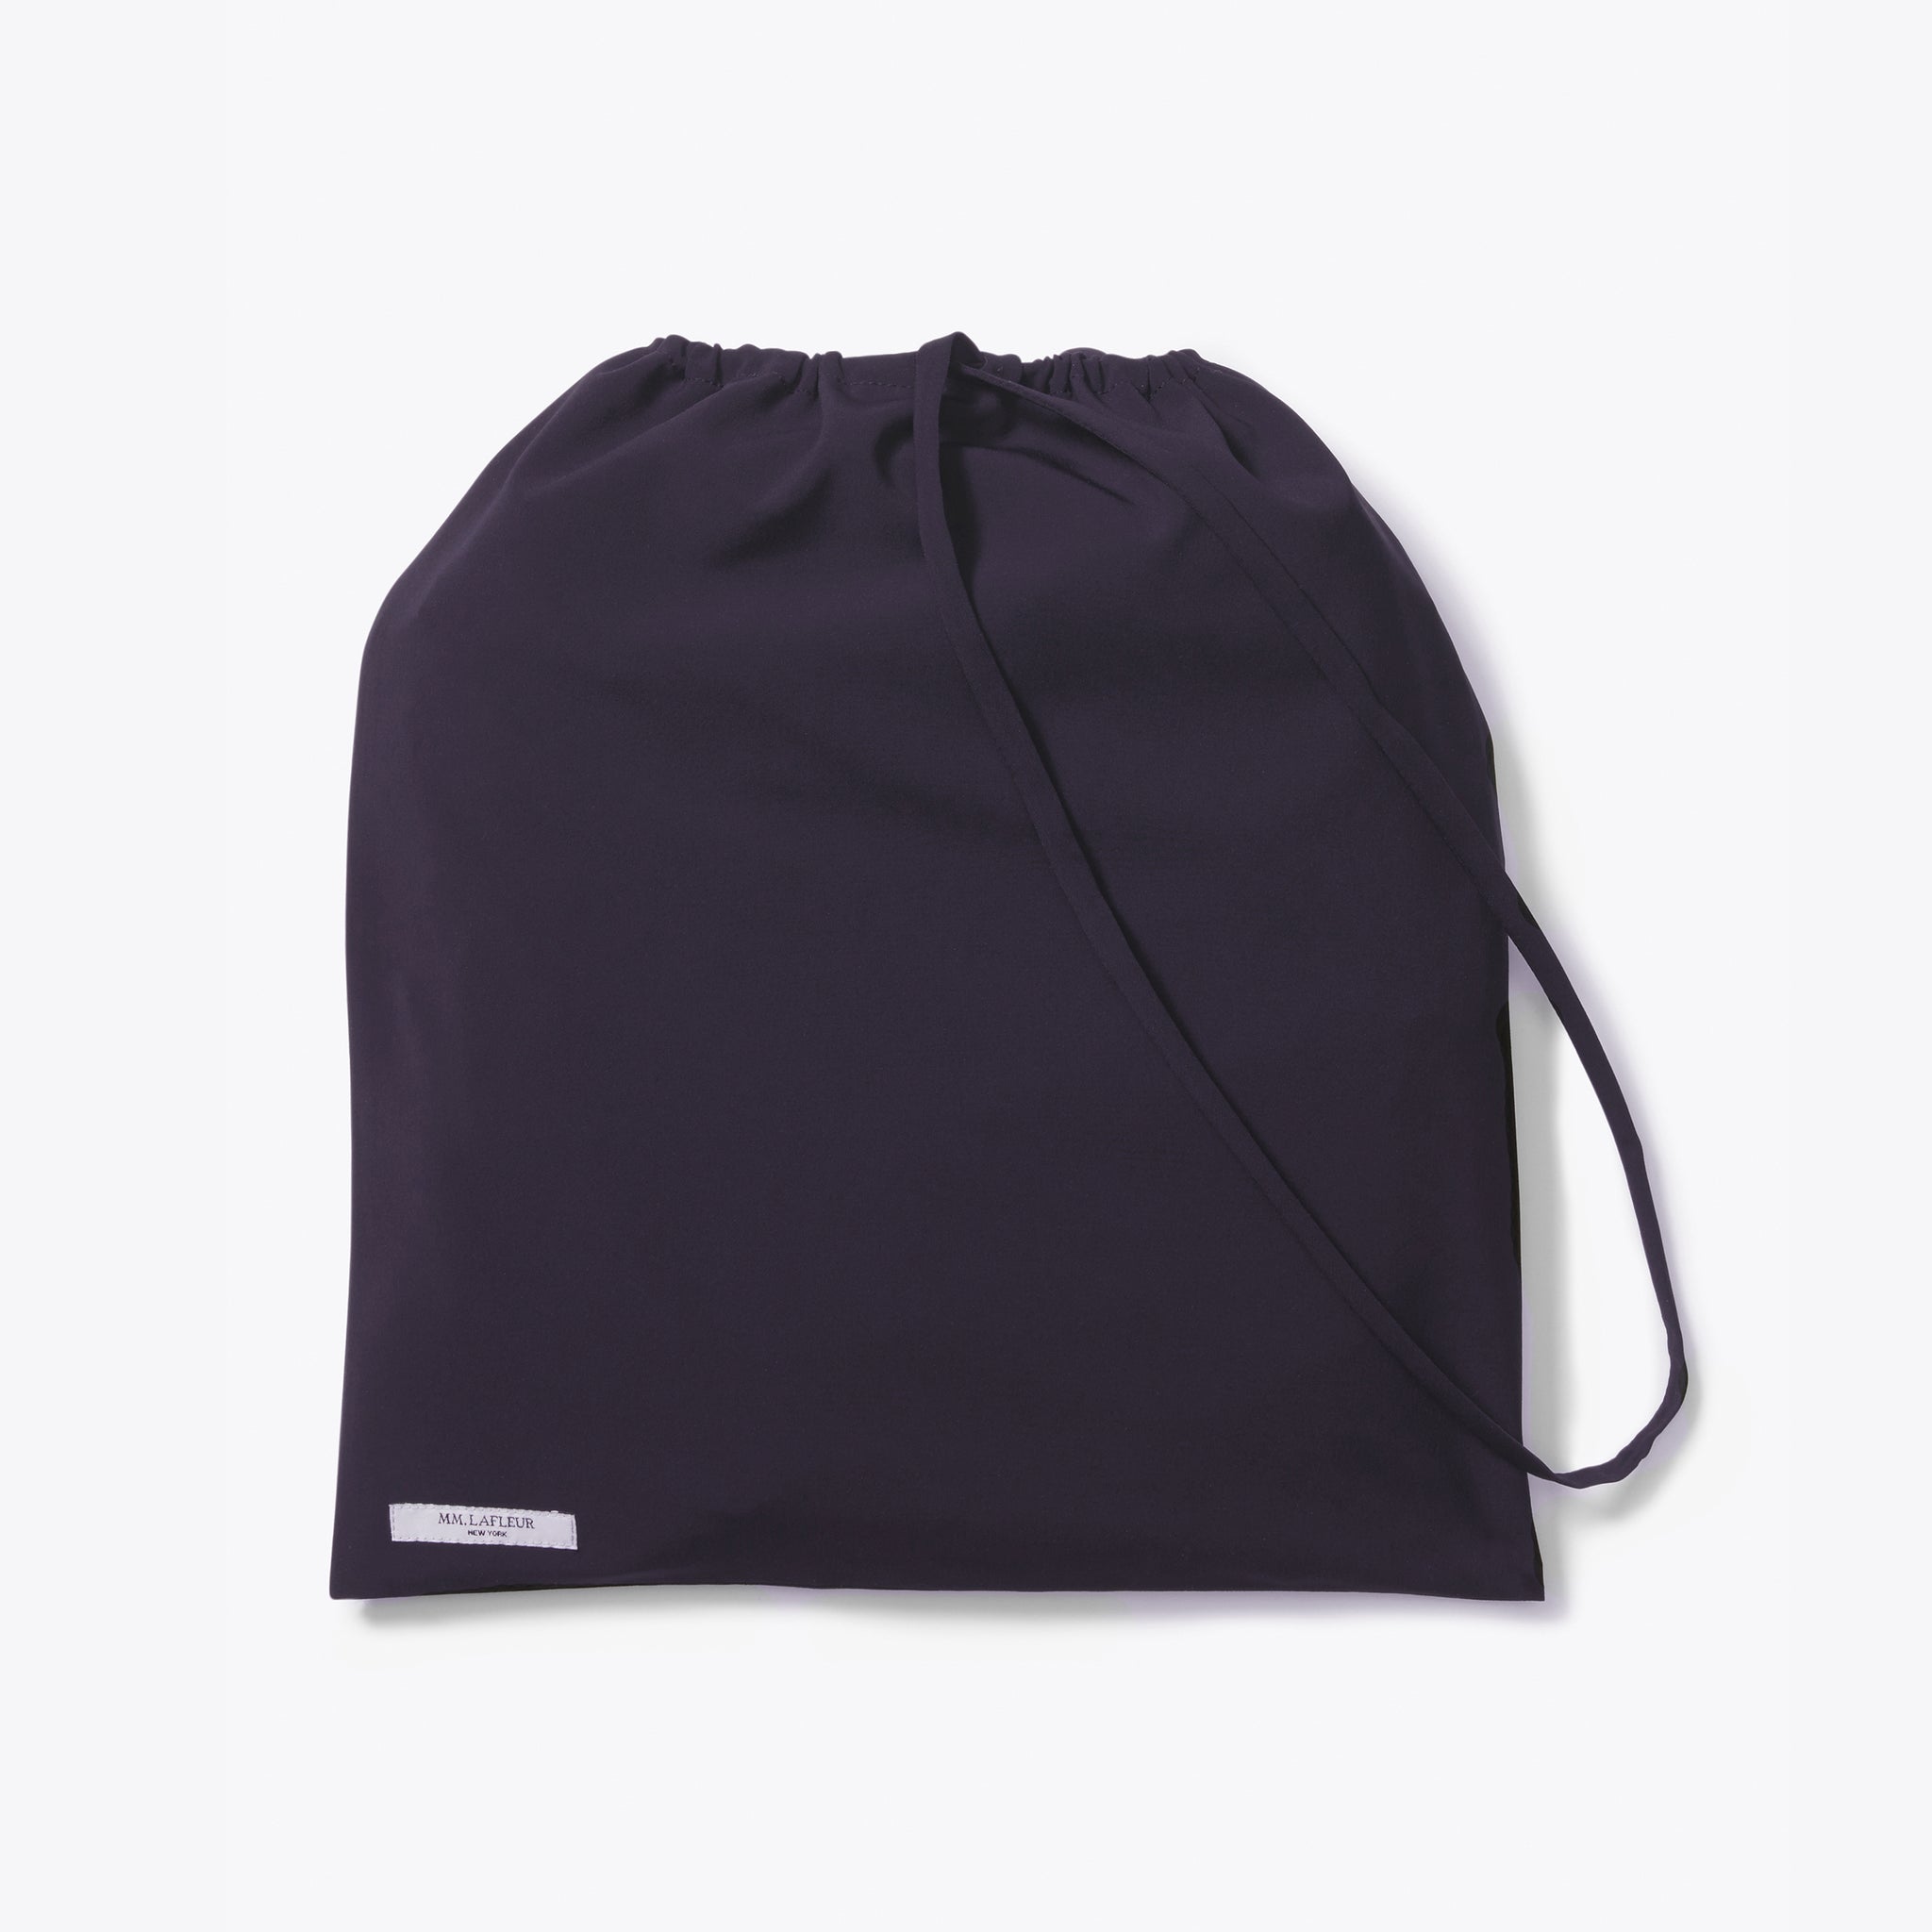 Packshot image of the Packable Bag Big—Origami Suiting in Cool Charcoal 